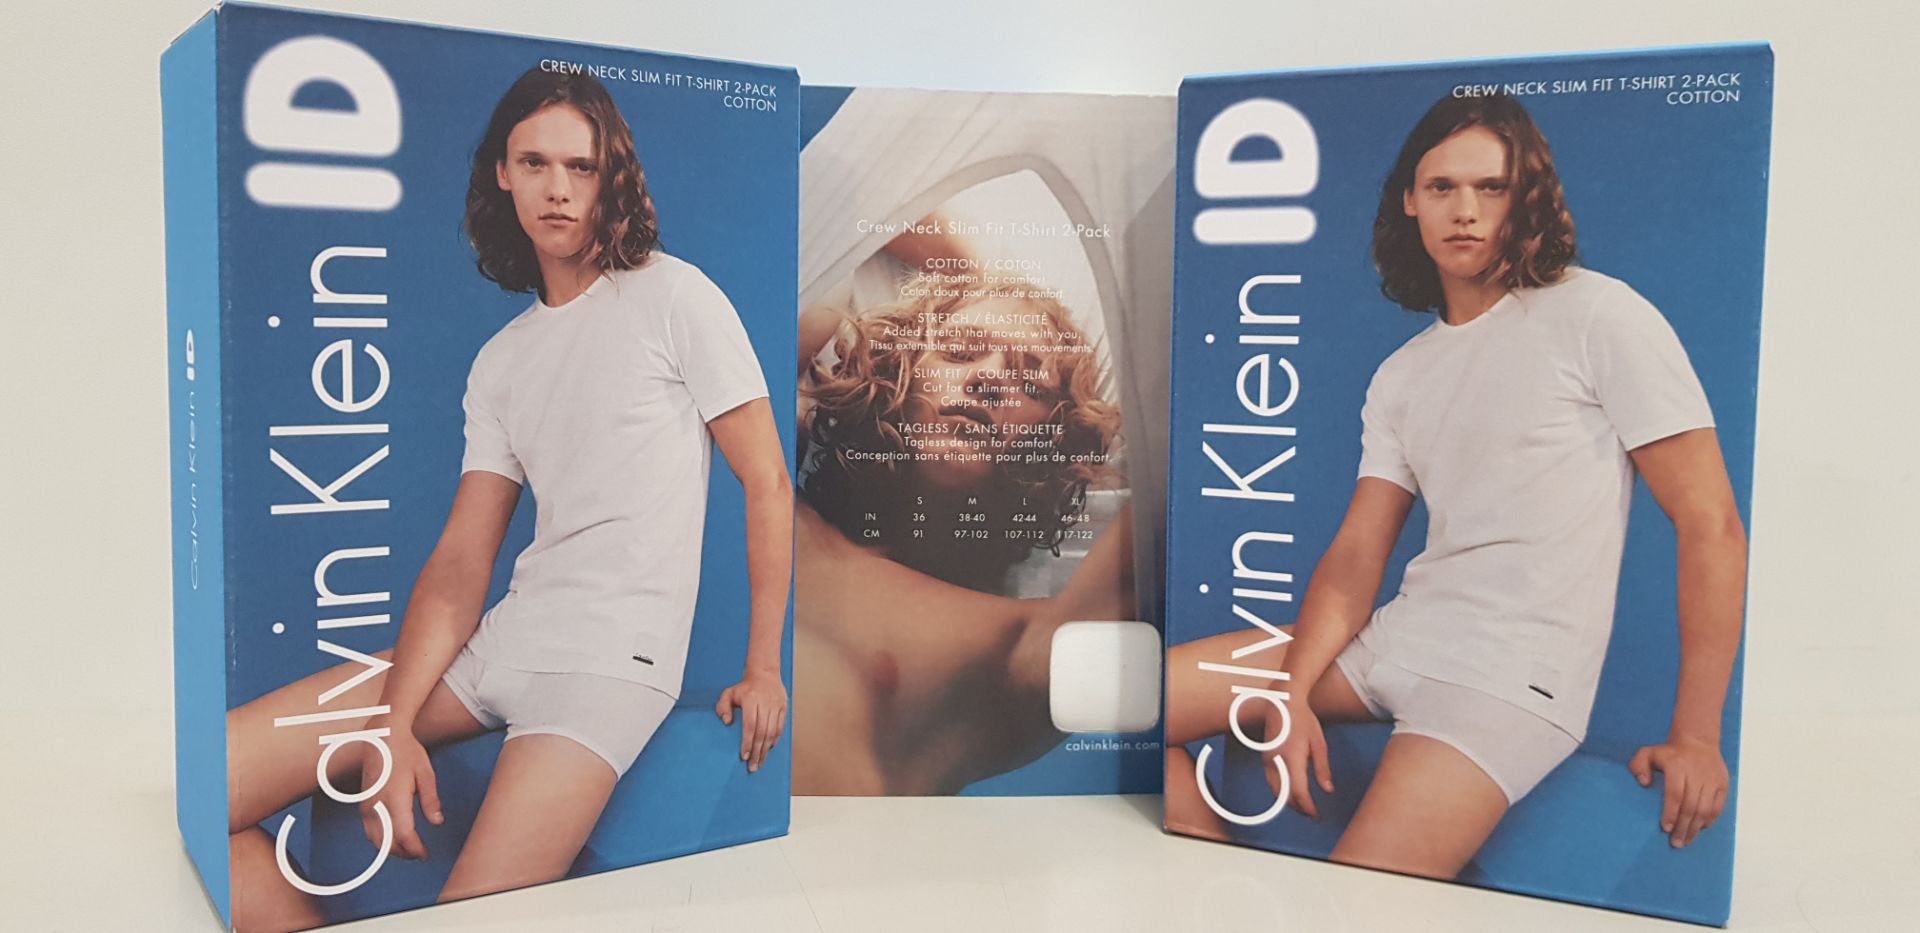 18 X BRAND NEW CALVIN KLEIN ID - PACK OF 2 WHITE CREW NECK SLIM FIT T-SHIRTS (COTTON) - ALL SIZE